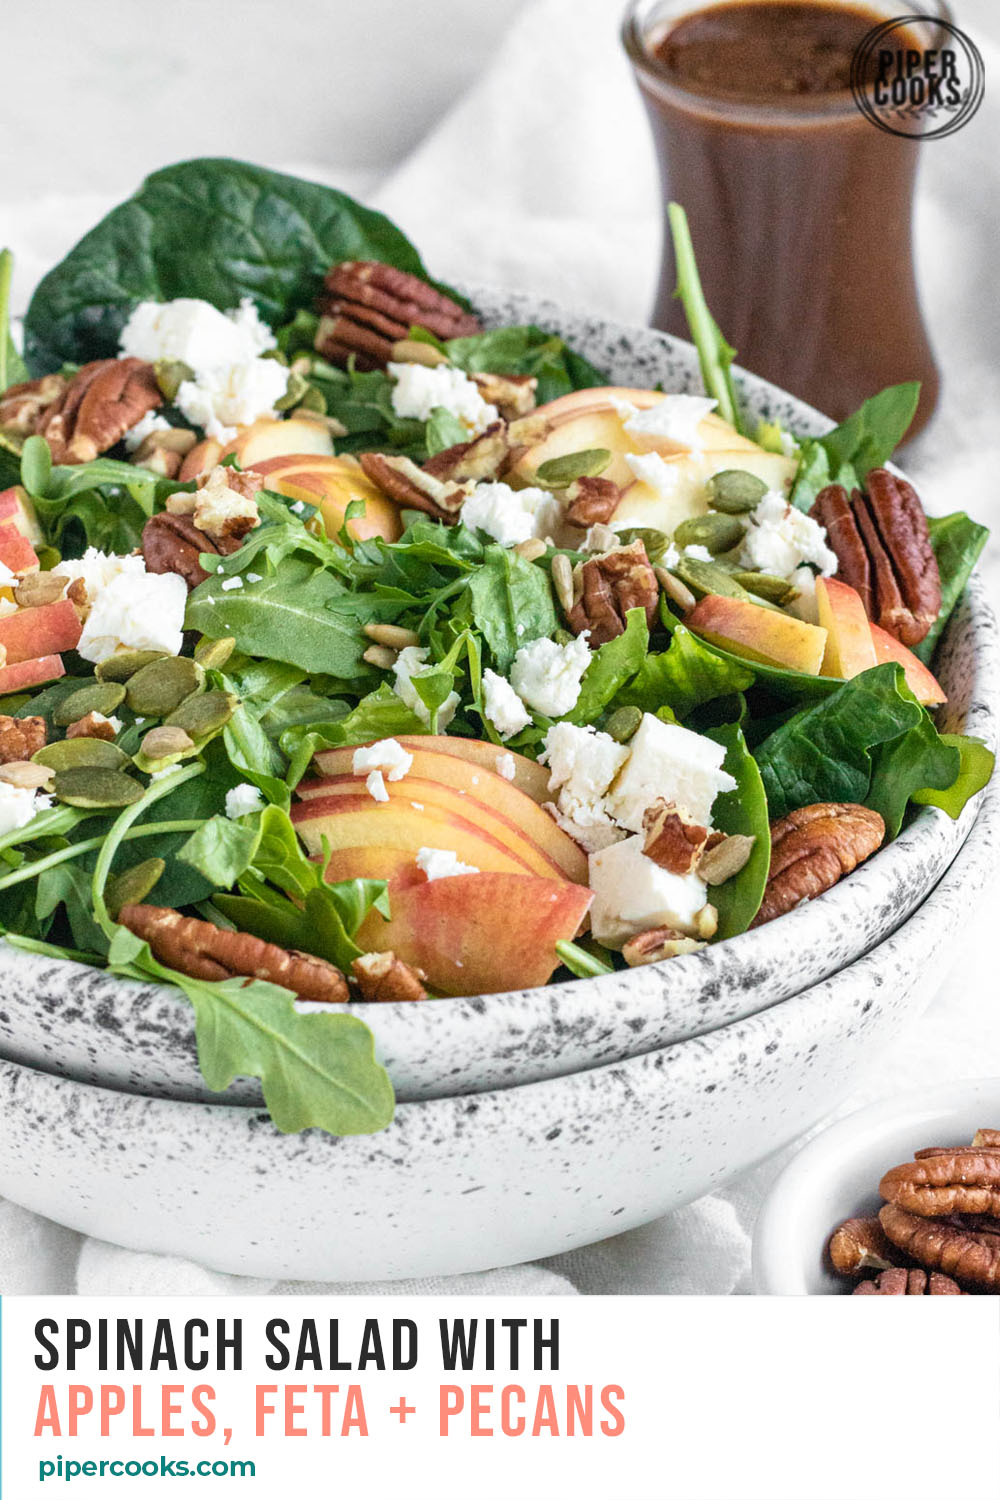 Spinach Salad with Apples in a bowl with text overlay for Pinterest